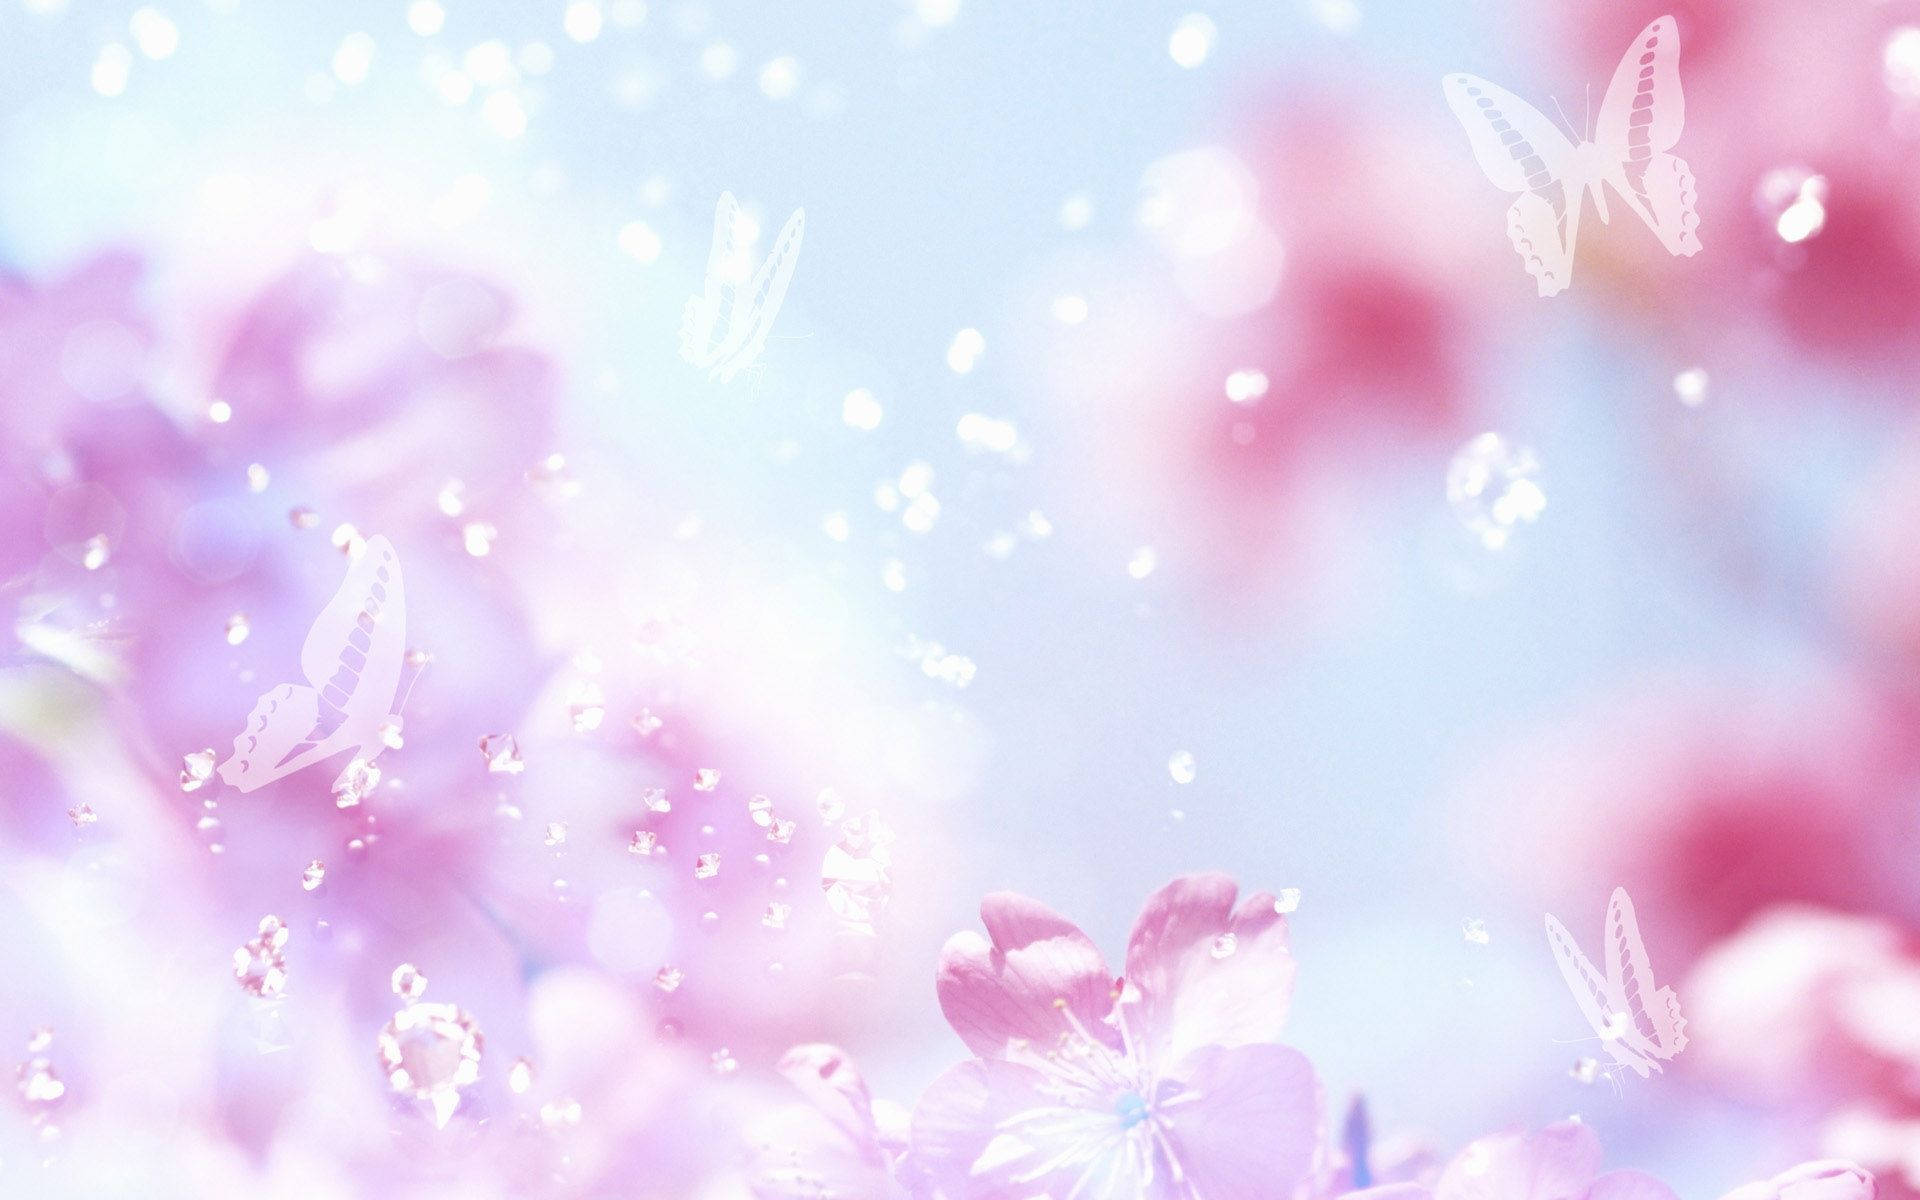 Pretty Refreshing Pink Butterfly Image Wallpaper